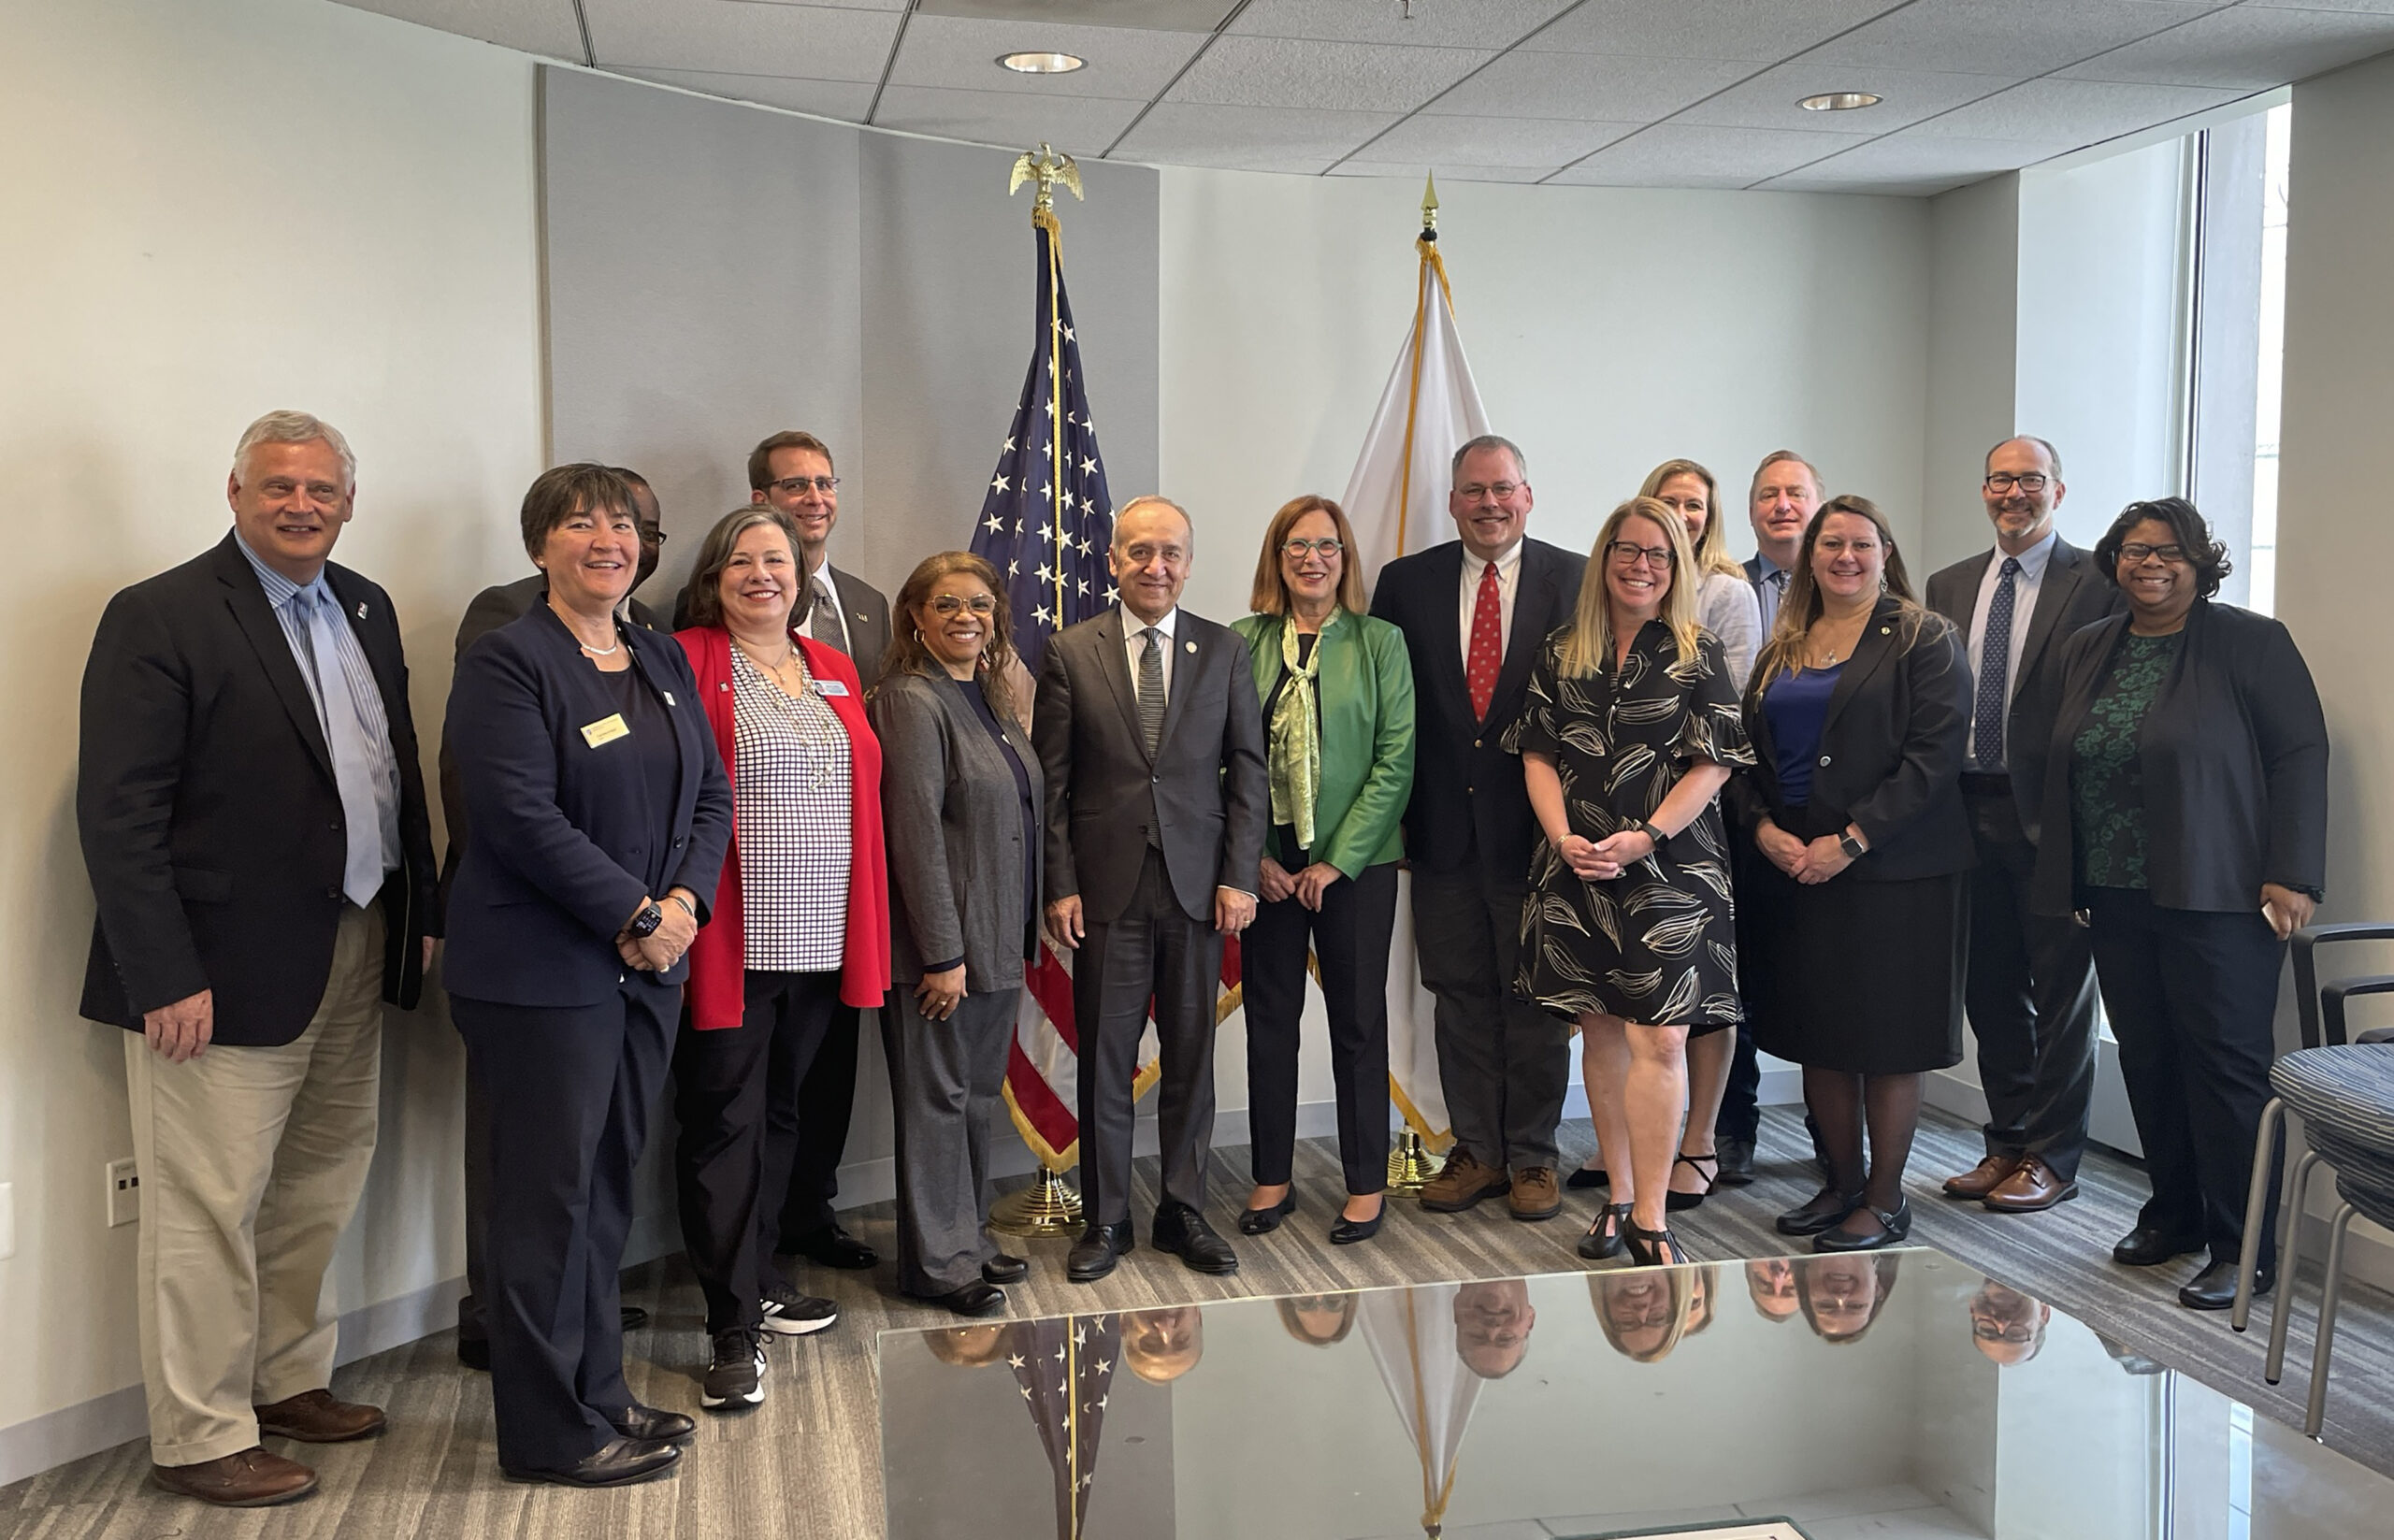 Member deans and CGS President Suzanne Ortega and Government Relations and Public Policy department stand with Nasser Paydar, Assistant Secretary of Postsecondary Education at the U.S. Department of Education.